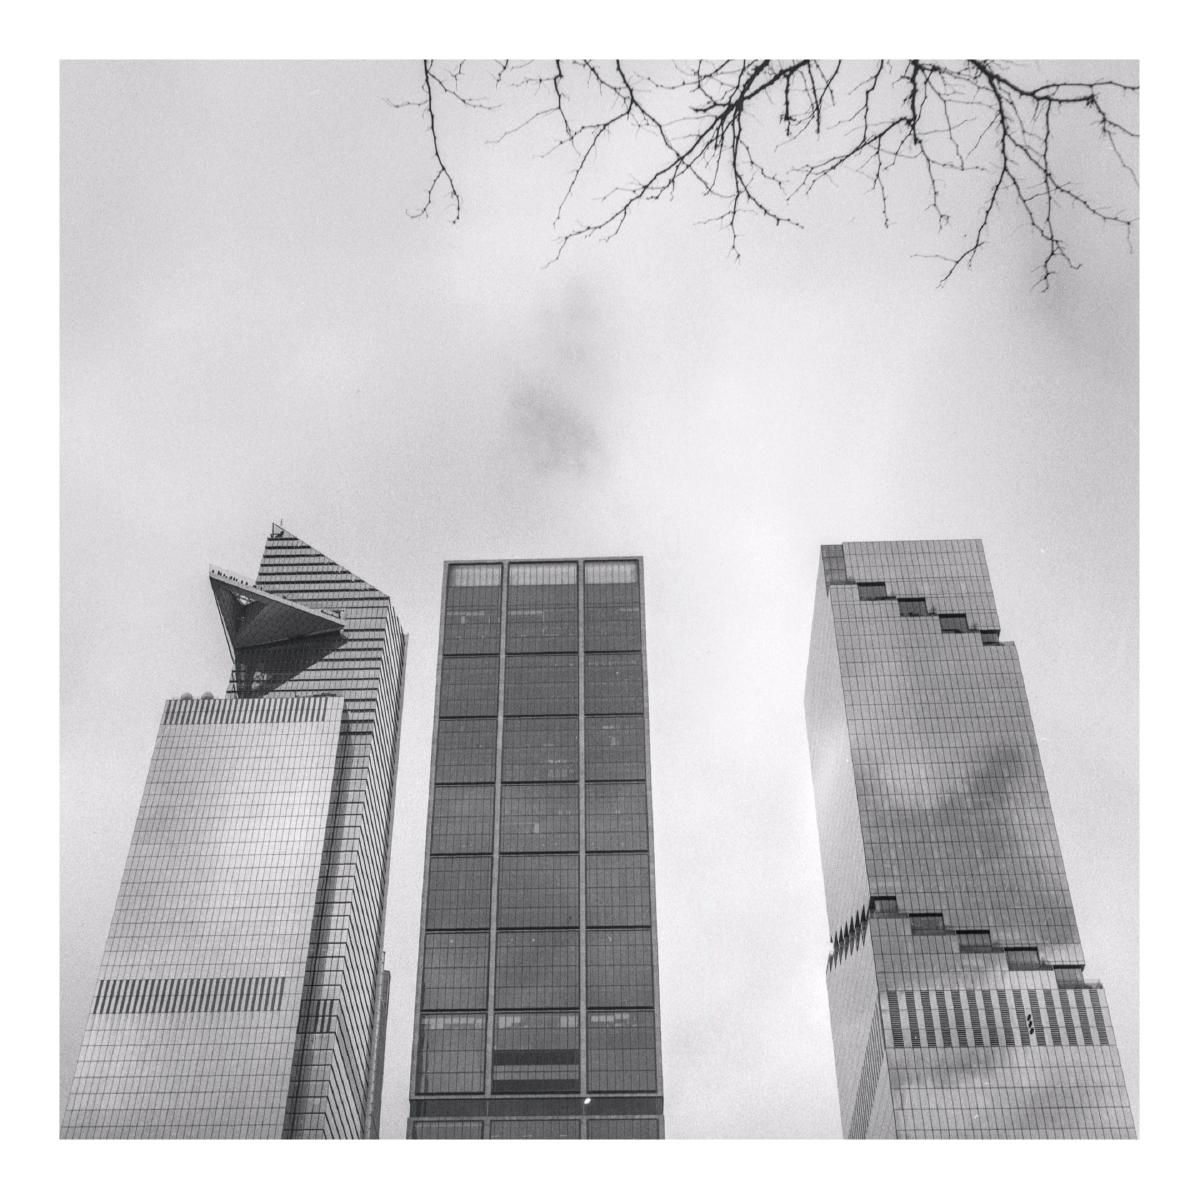 Black and white photo of three sky scrapers with glass window facades are lined up with two on the left closer together and the right one with more a gap with the middle building. Each building a different take on rectangle, from left to right: stacked rectangles with triangle shapes sticking out the top, proper rectangles with square segments, rectangle exterior windows facade broken up with recessed rectangles angling down. The top right of the photo has leafless tree branches encroaching towards the top of the buildings.